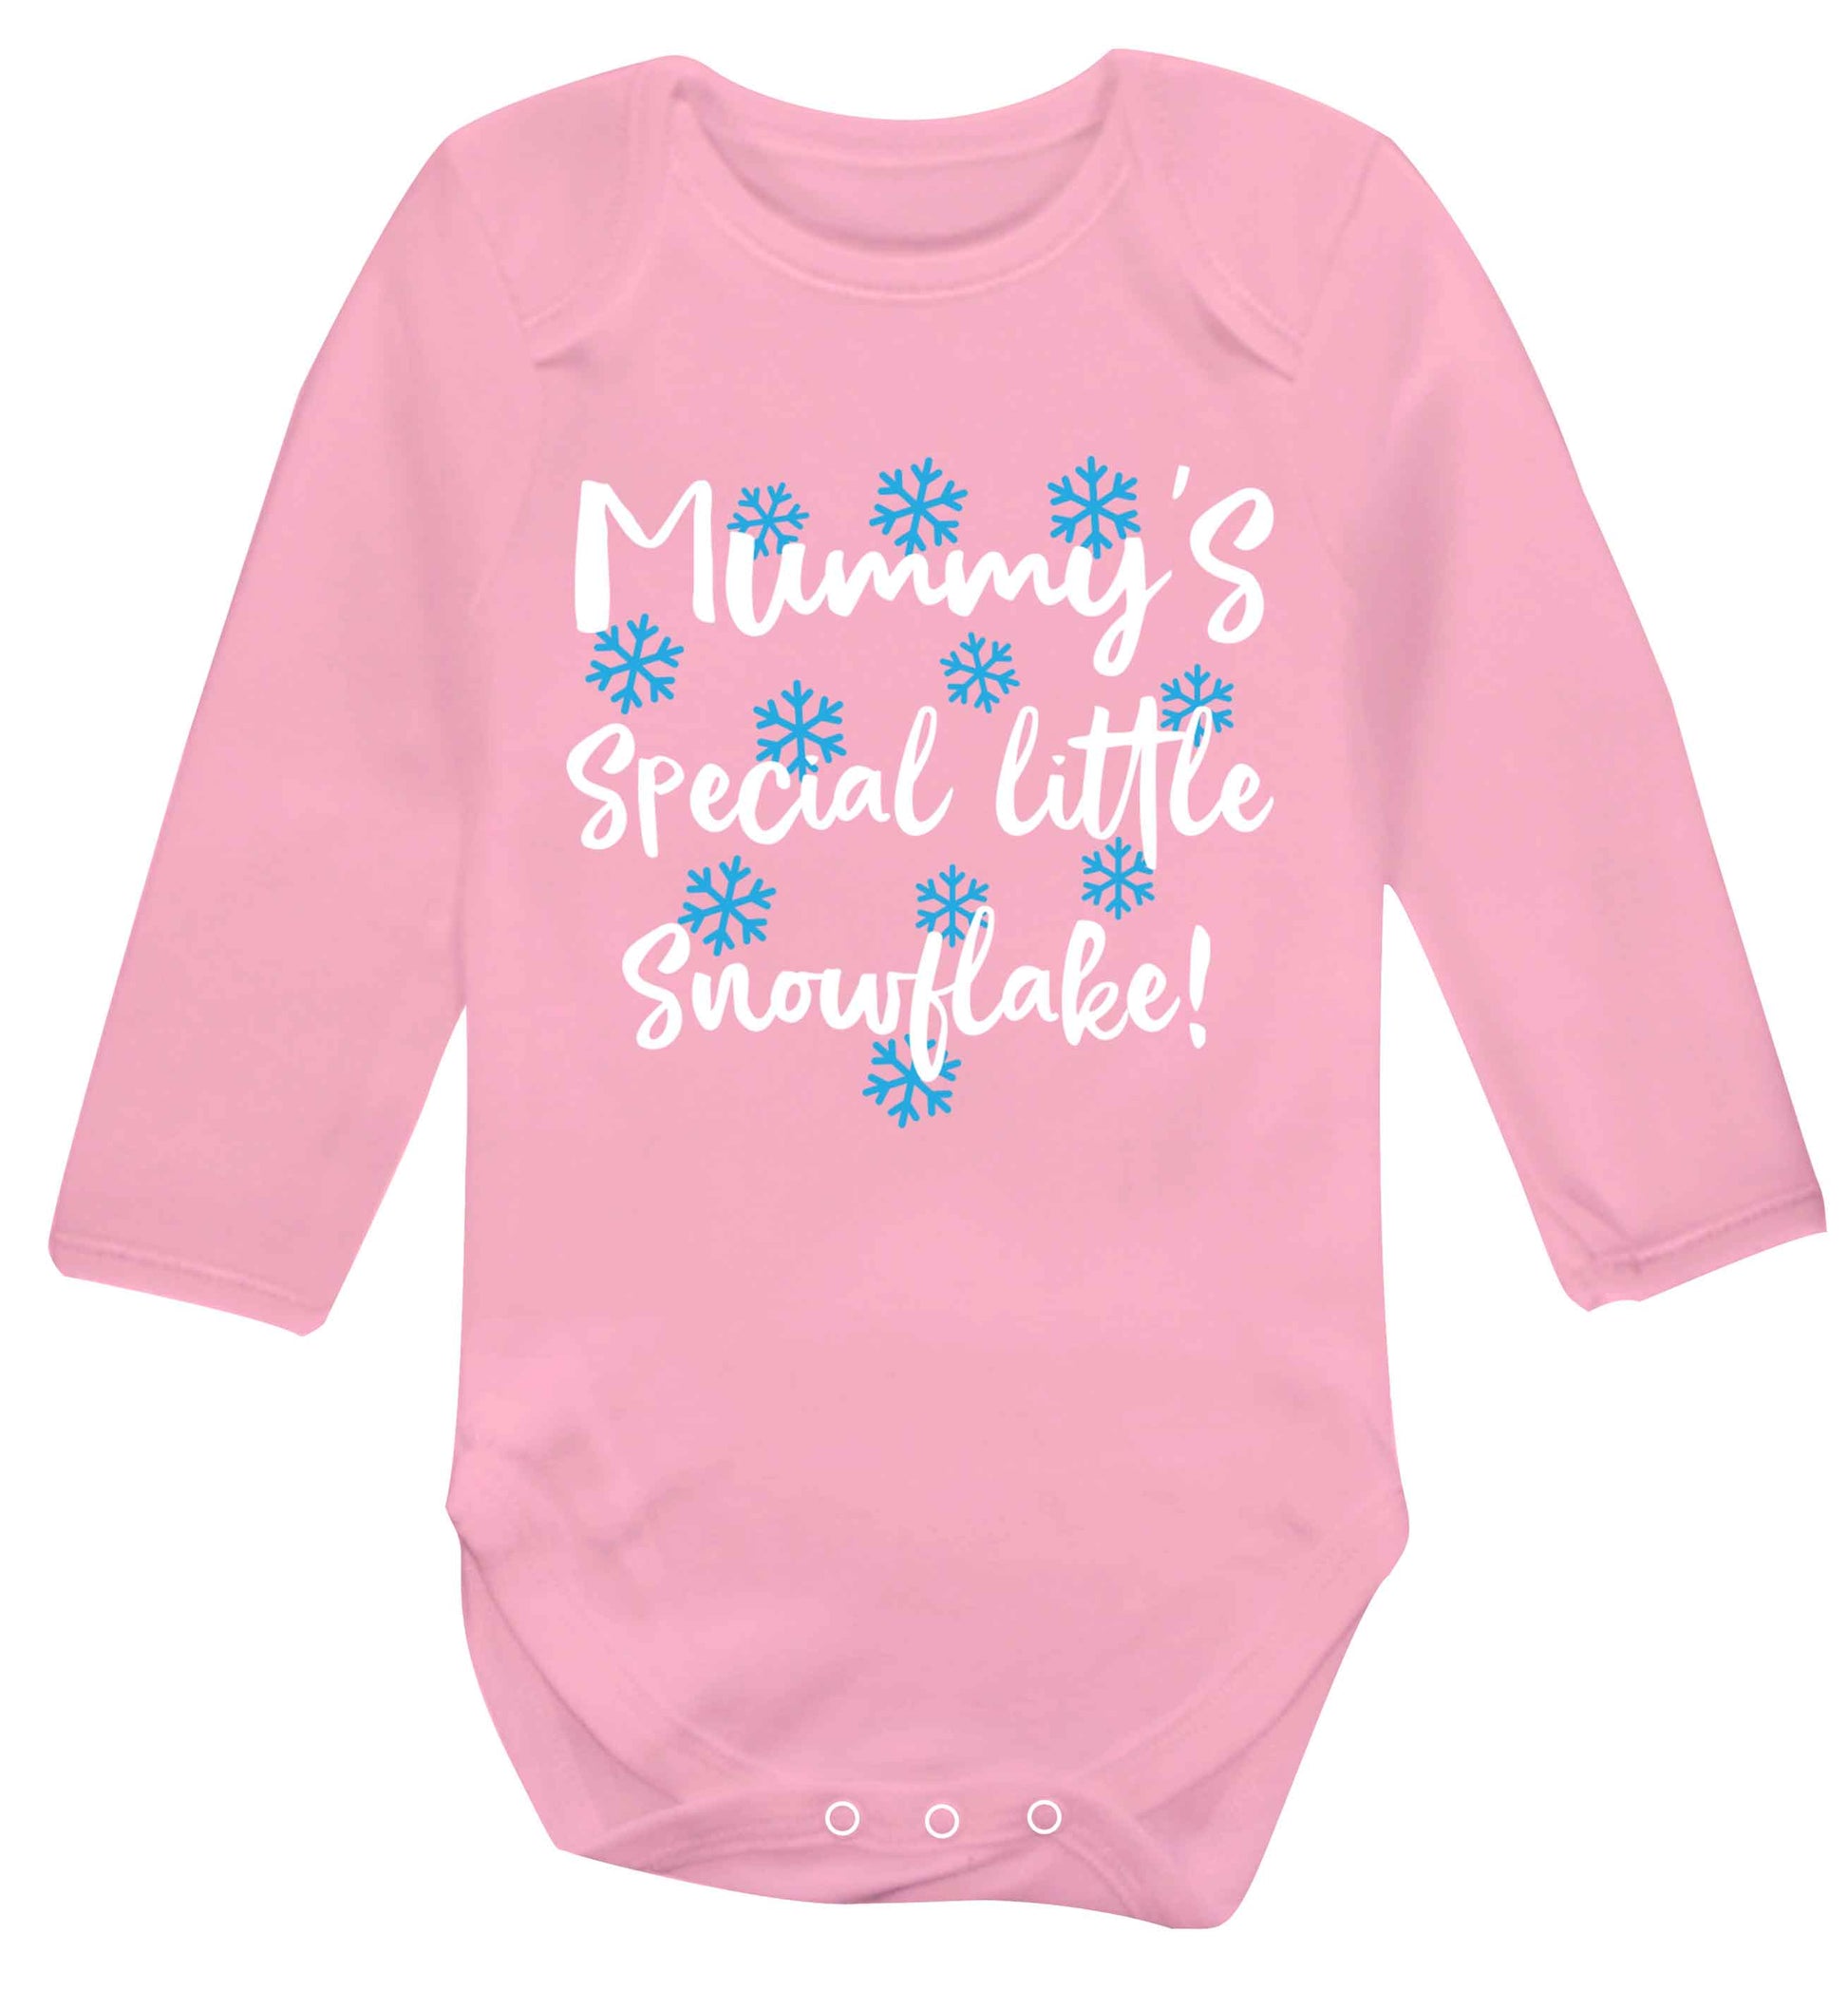 Mummy's special little snowflake Baby Vest long sleeved pale pink 6-12 months